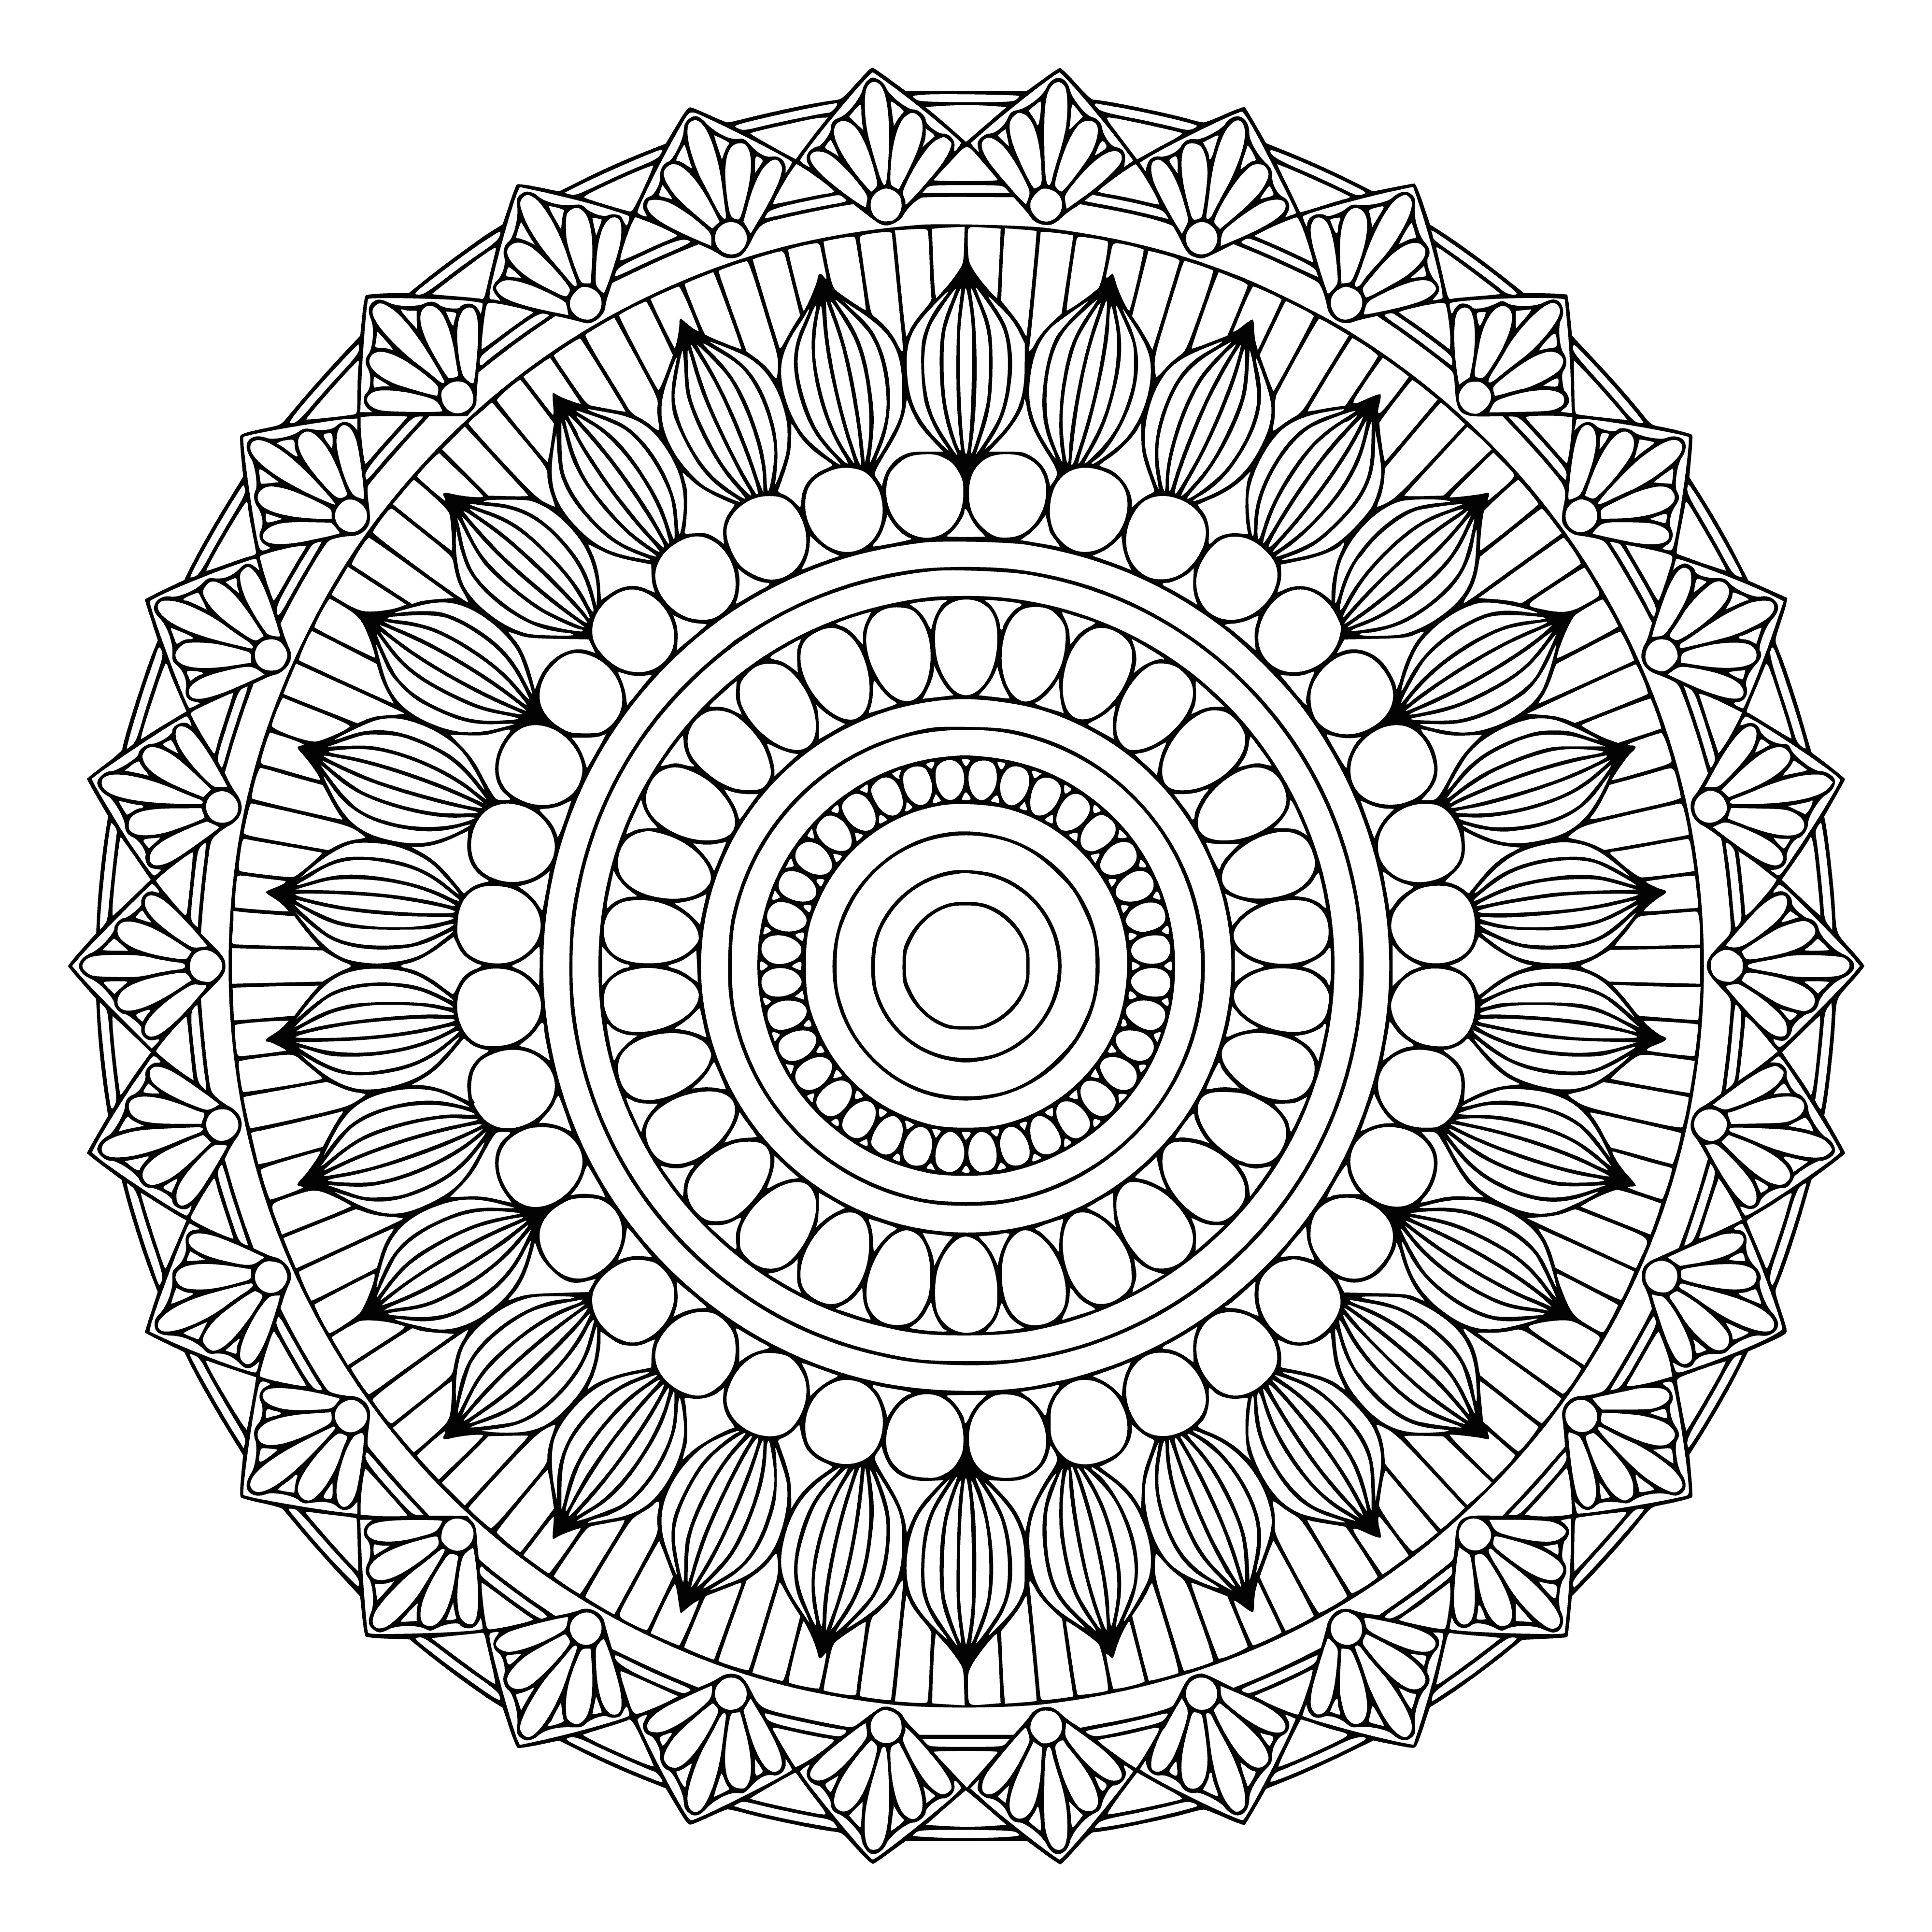 coloring page: Mandala coloring pages used to reflect upon and find inner peace.